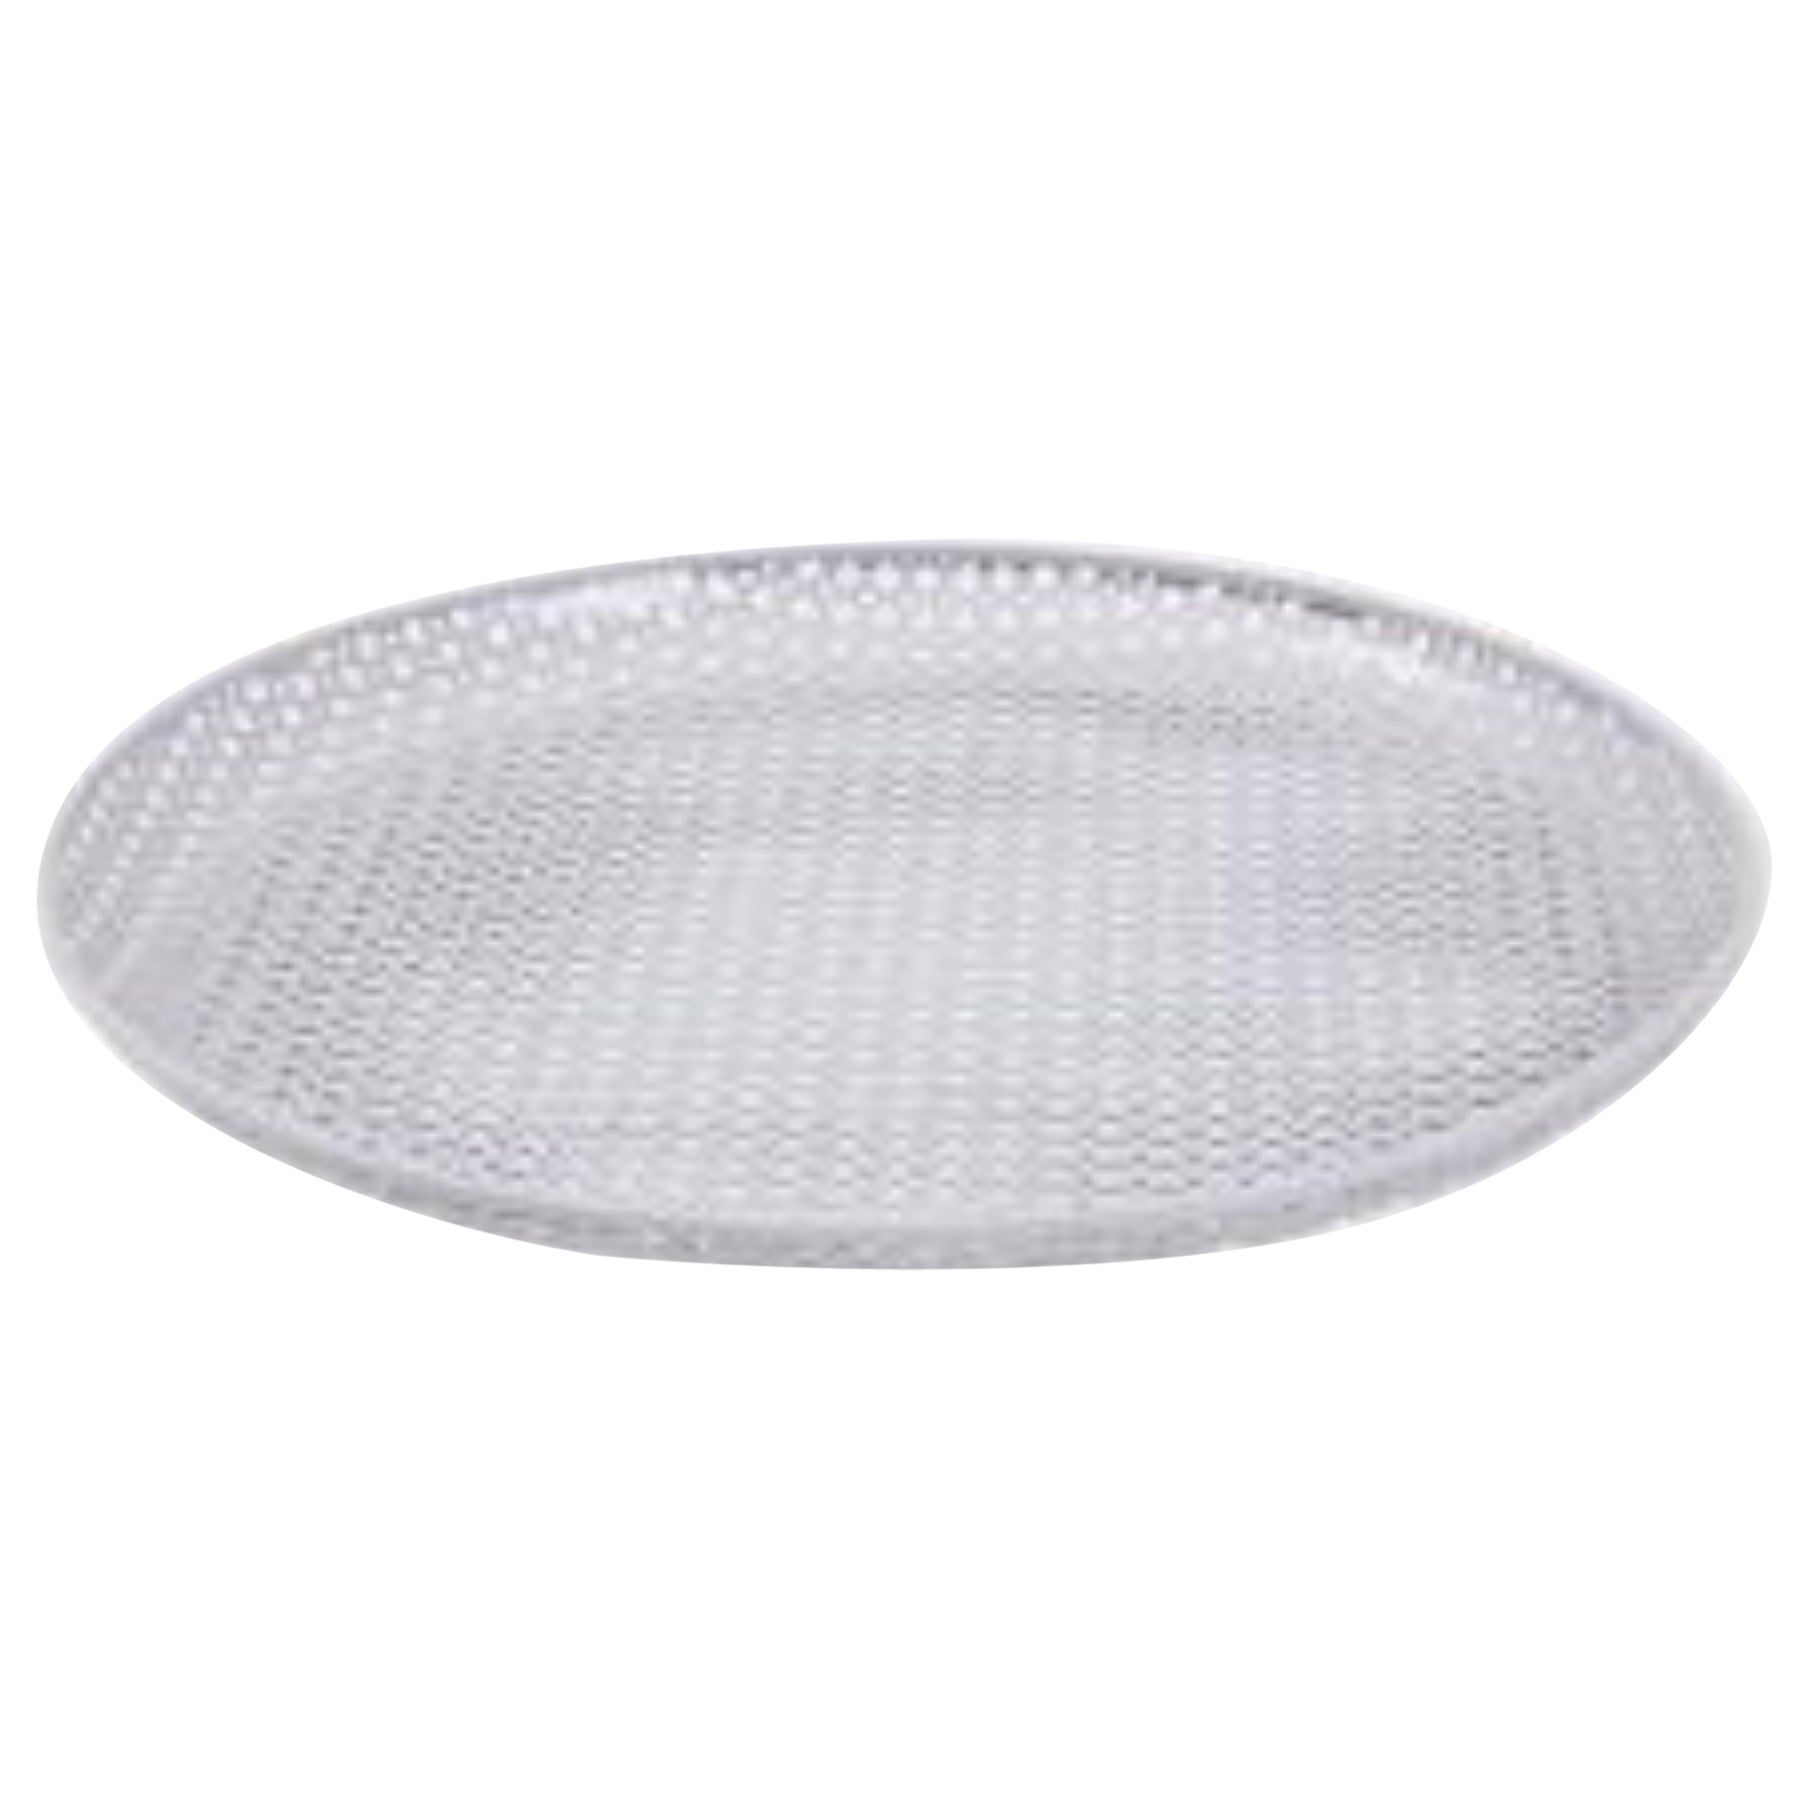 White Round Perforated Metal Tray by Mathieu Mategot, France, c. 1950 For Sale